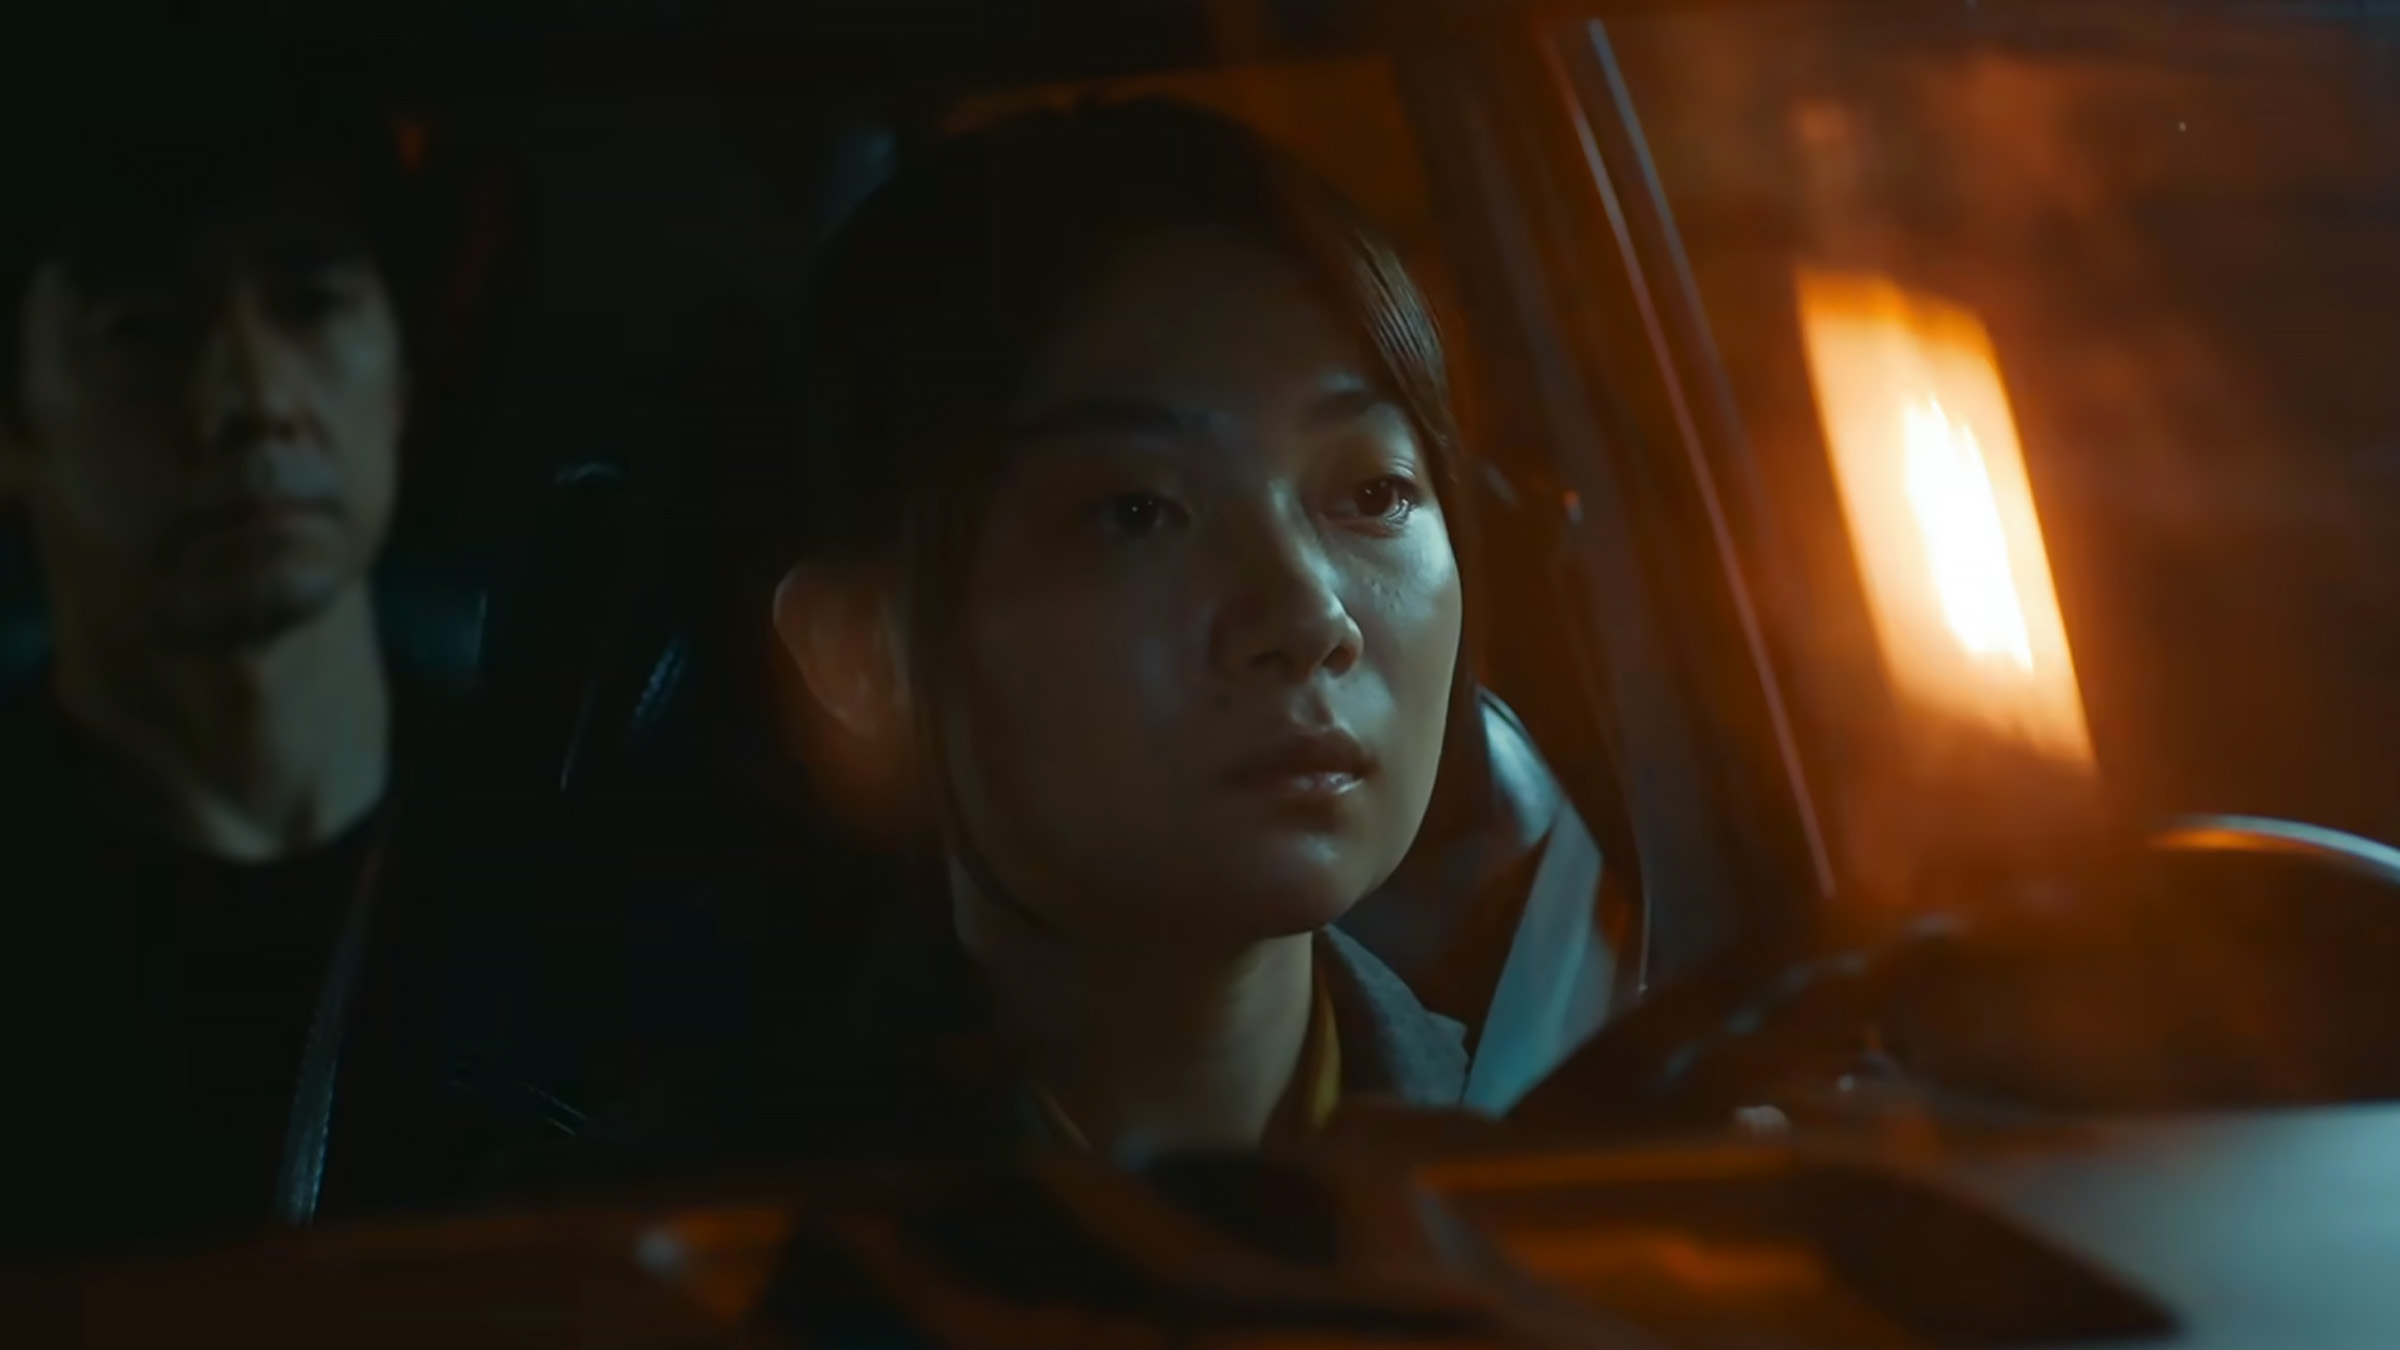 Art of the Cut: Navigating Love and Loss in “Drive My Car”